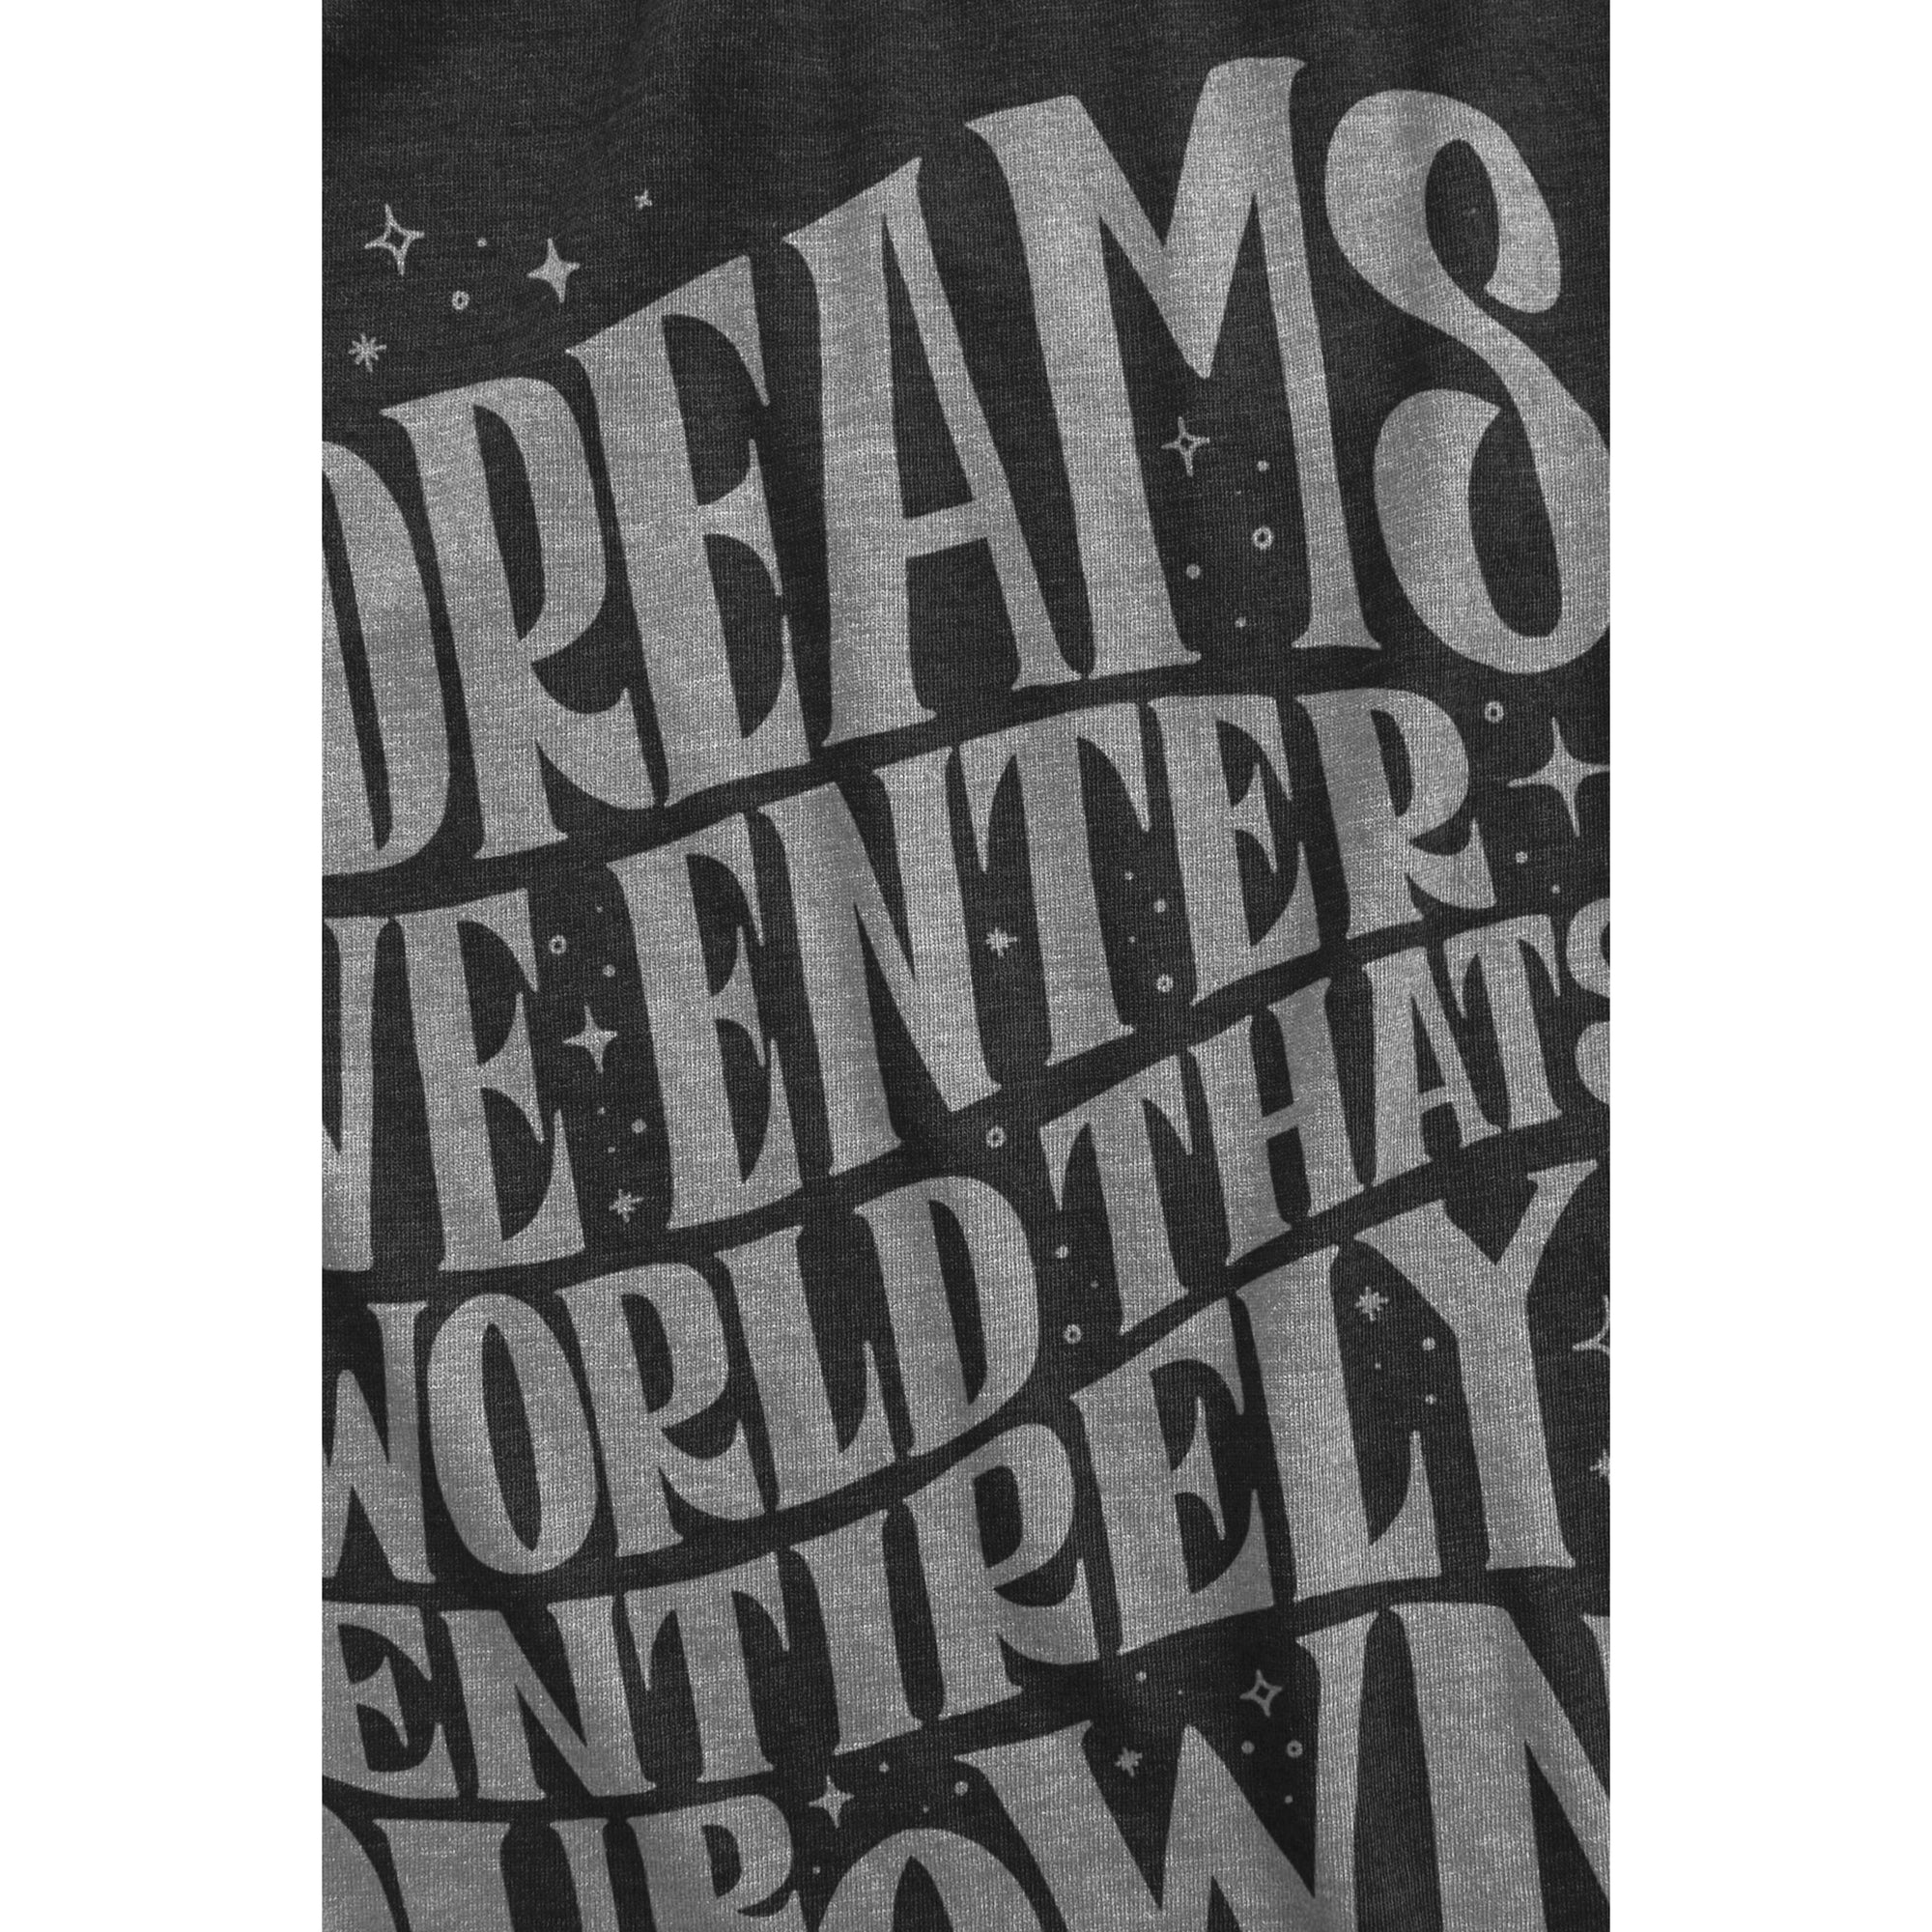 In Dreams We Enter A World That's Entirely Our Own (Harry Potter) Women's Graphic Printed Lightweight Slouchy 3/4 Sleeves Sweatshirt